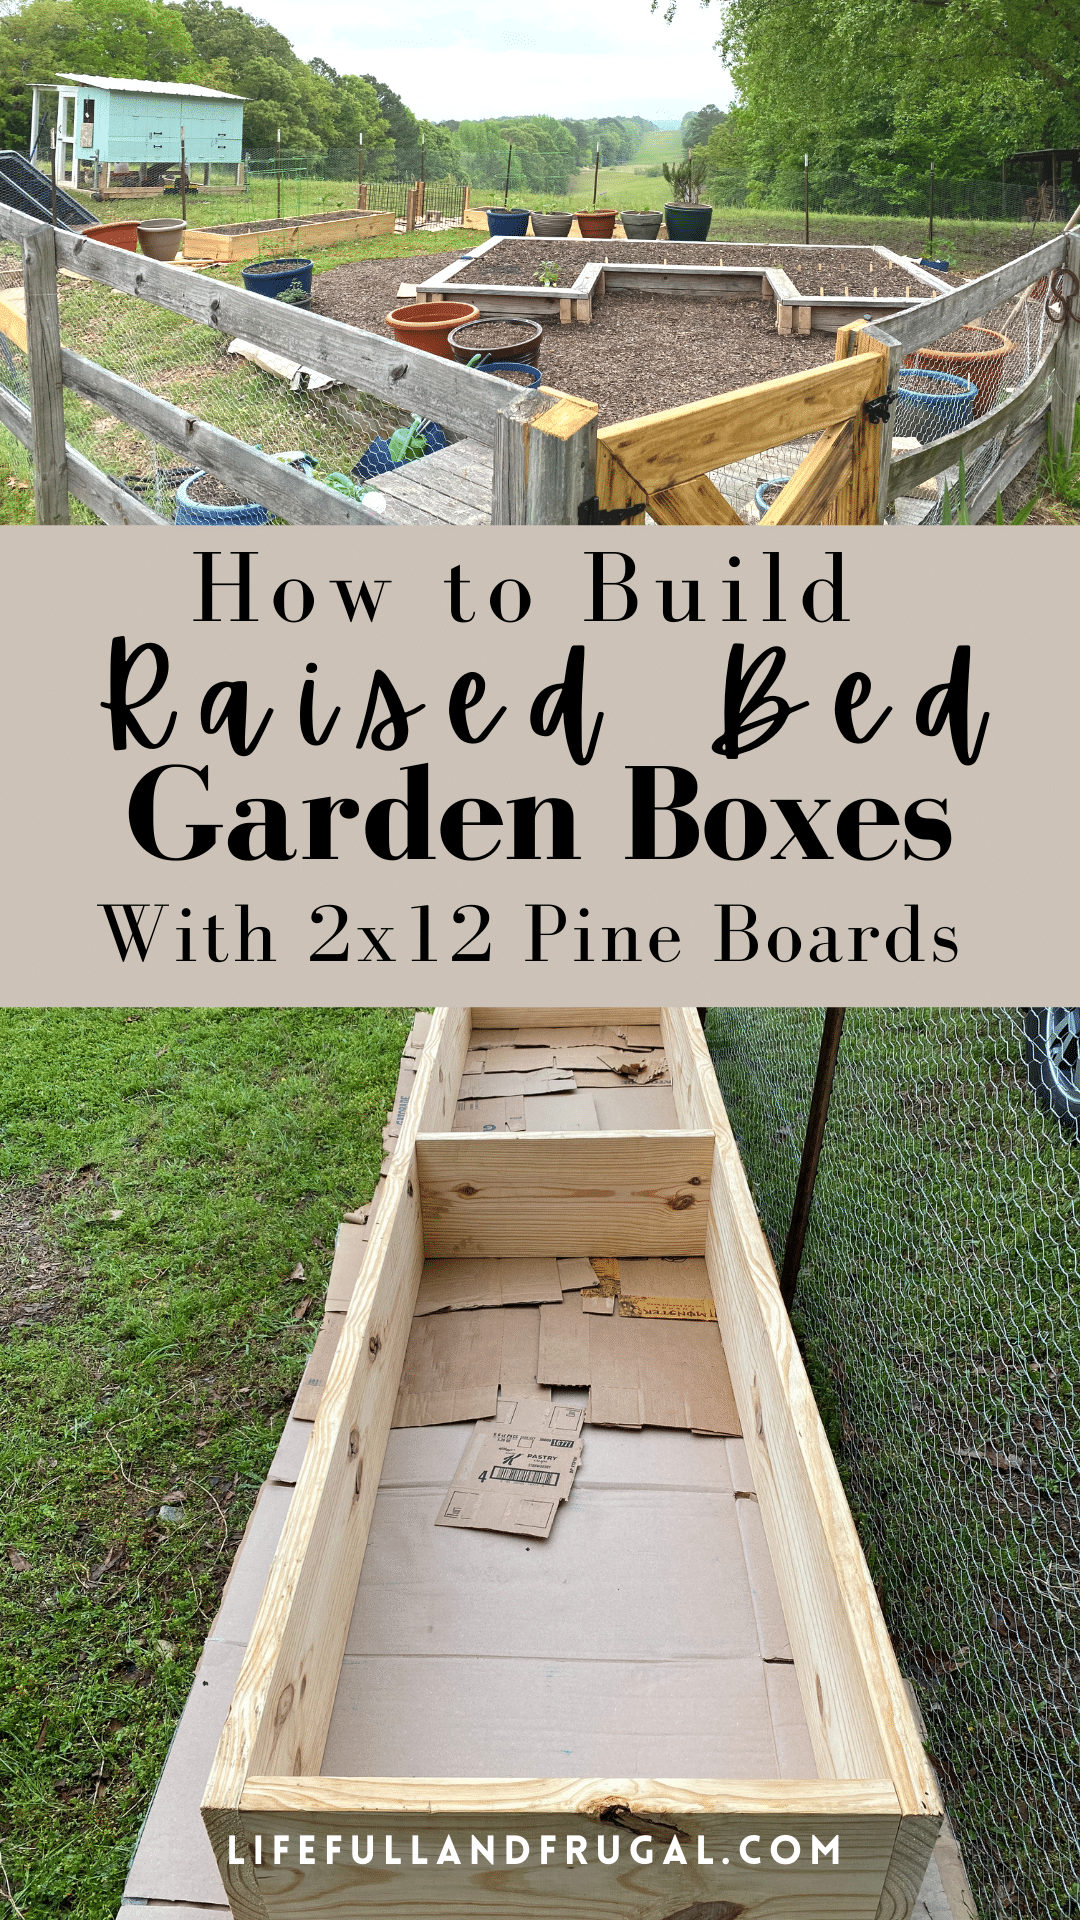 DIY Raised Bed Garden Box Tutorial - Life Full and Frugal